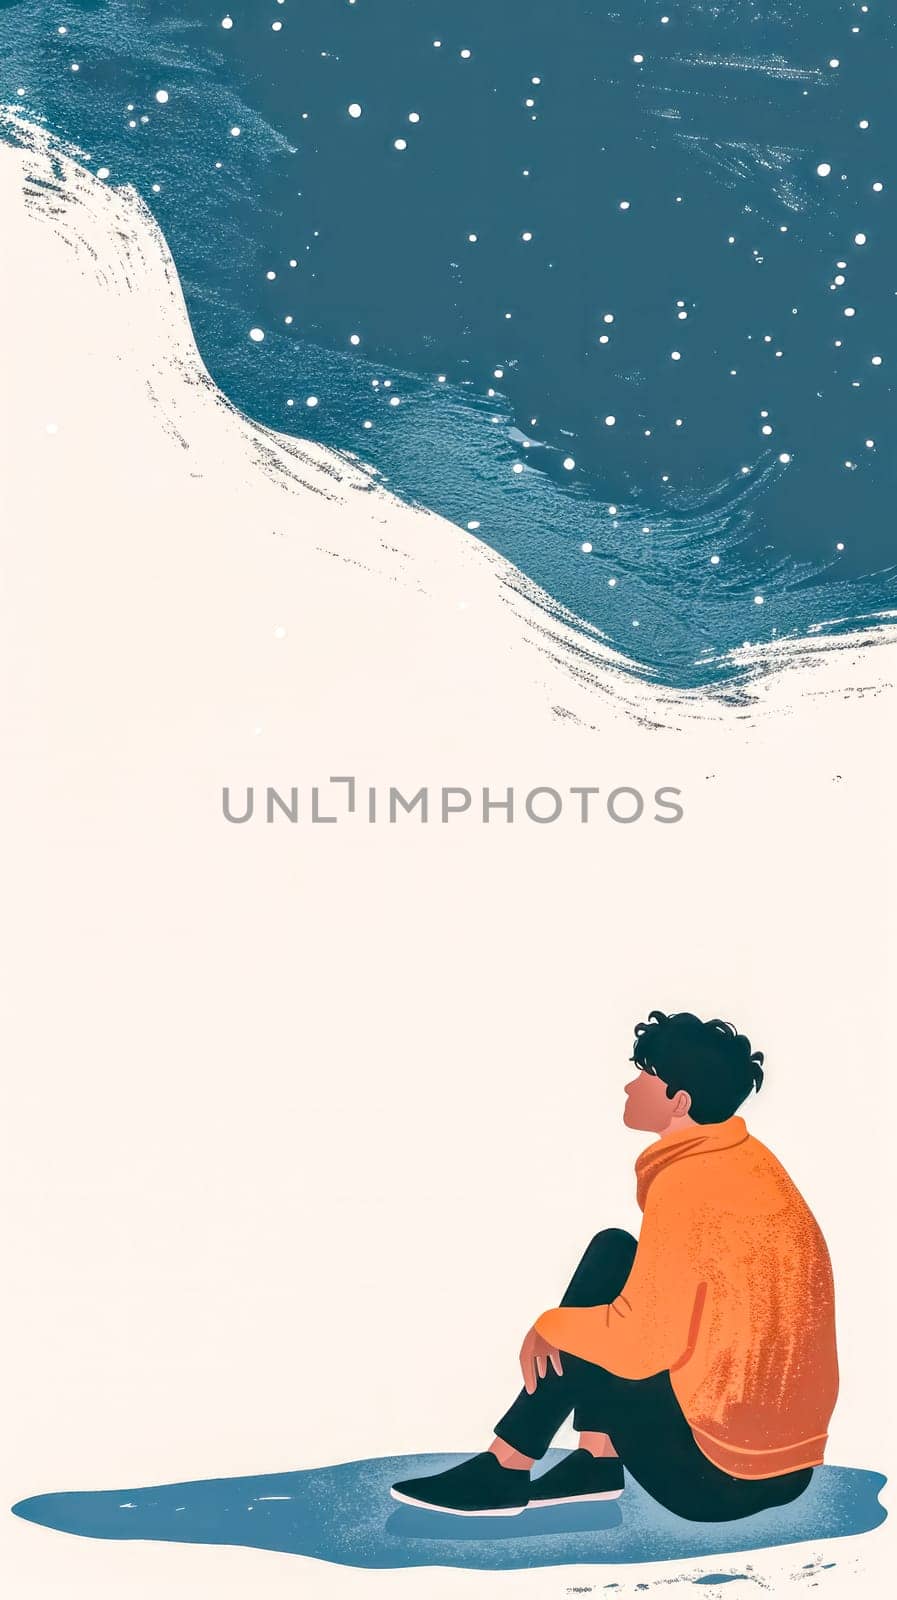 individual sitting and gazing contemplatively at a starry sky, illustrated in a minimalist style with a stark contrast between the vast, dark cosmos and the solitary human figure by Edophoto